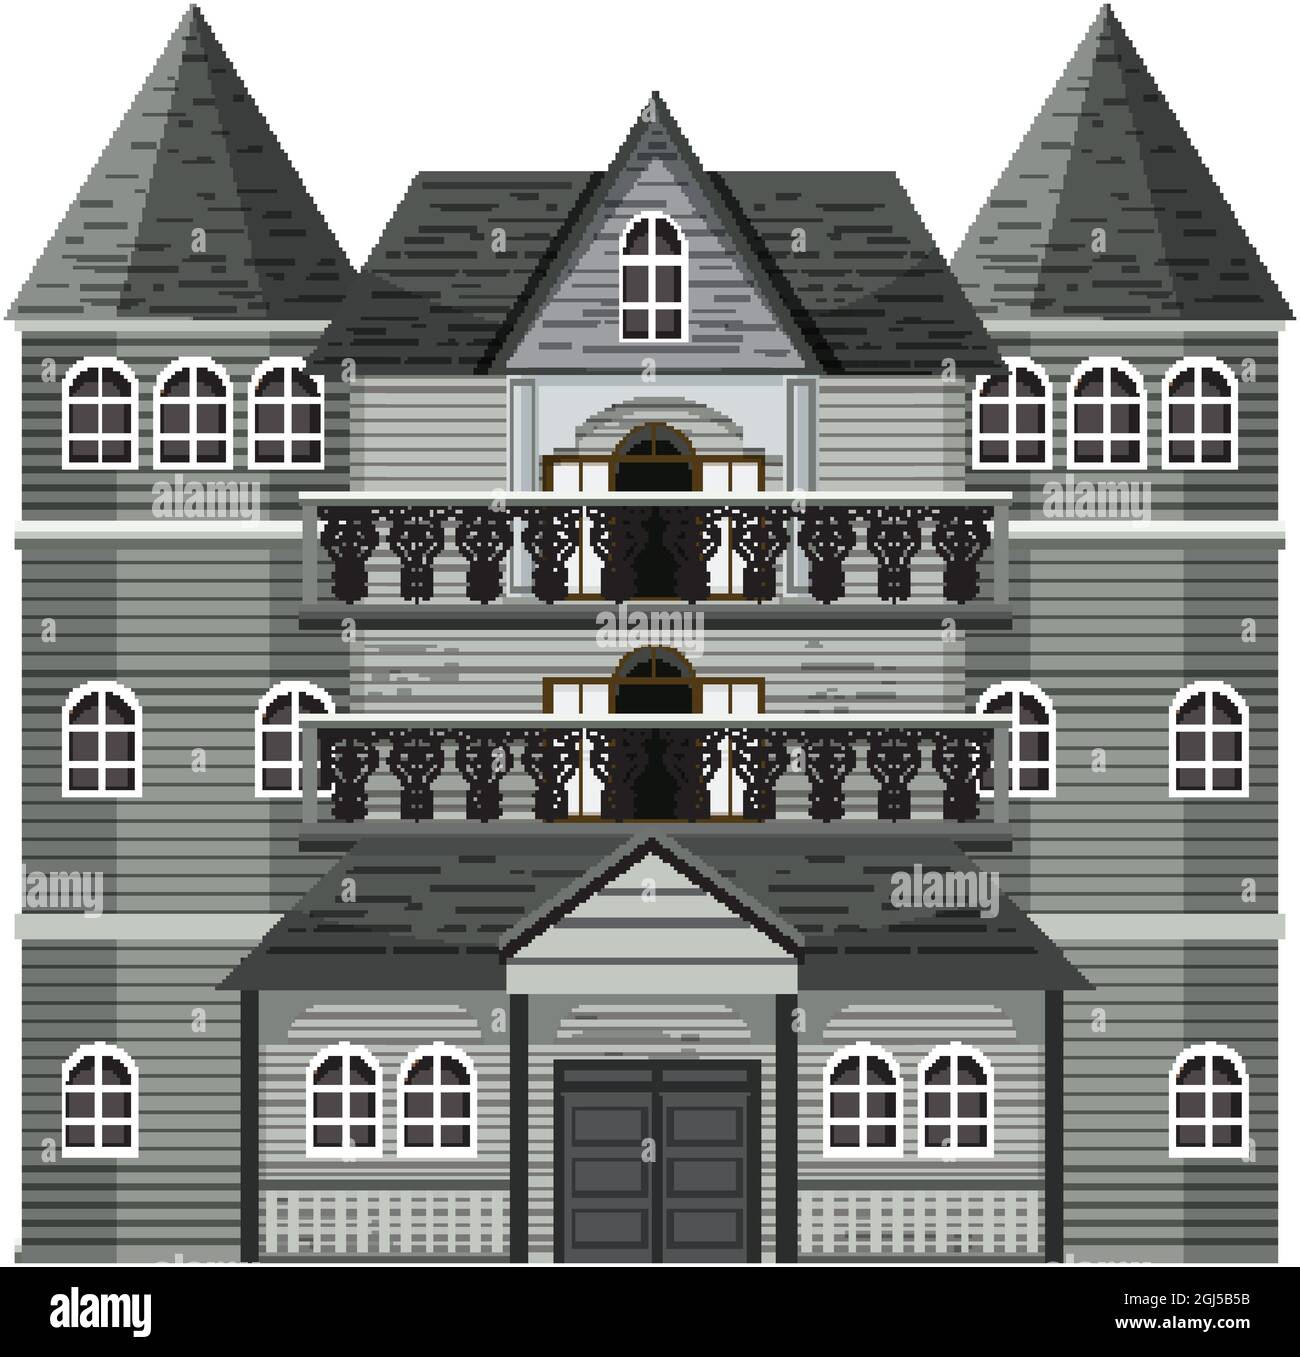 Isolated haunted mansion facade illustration Stock Vector